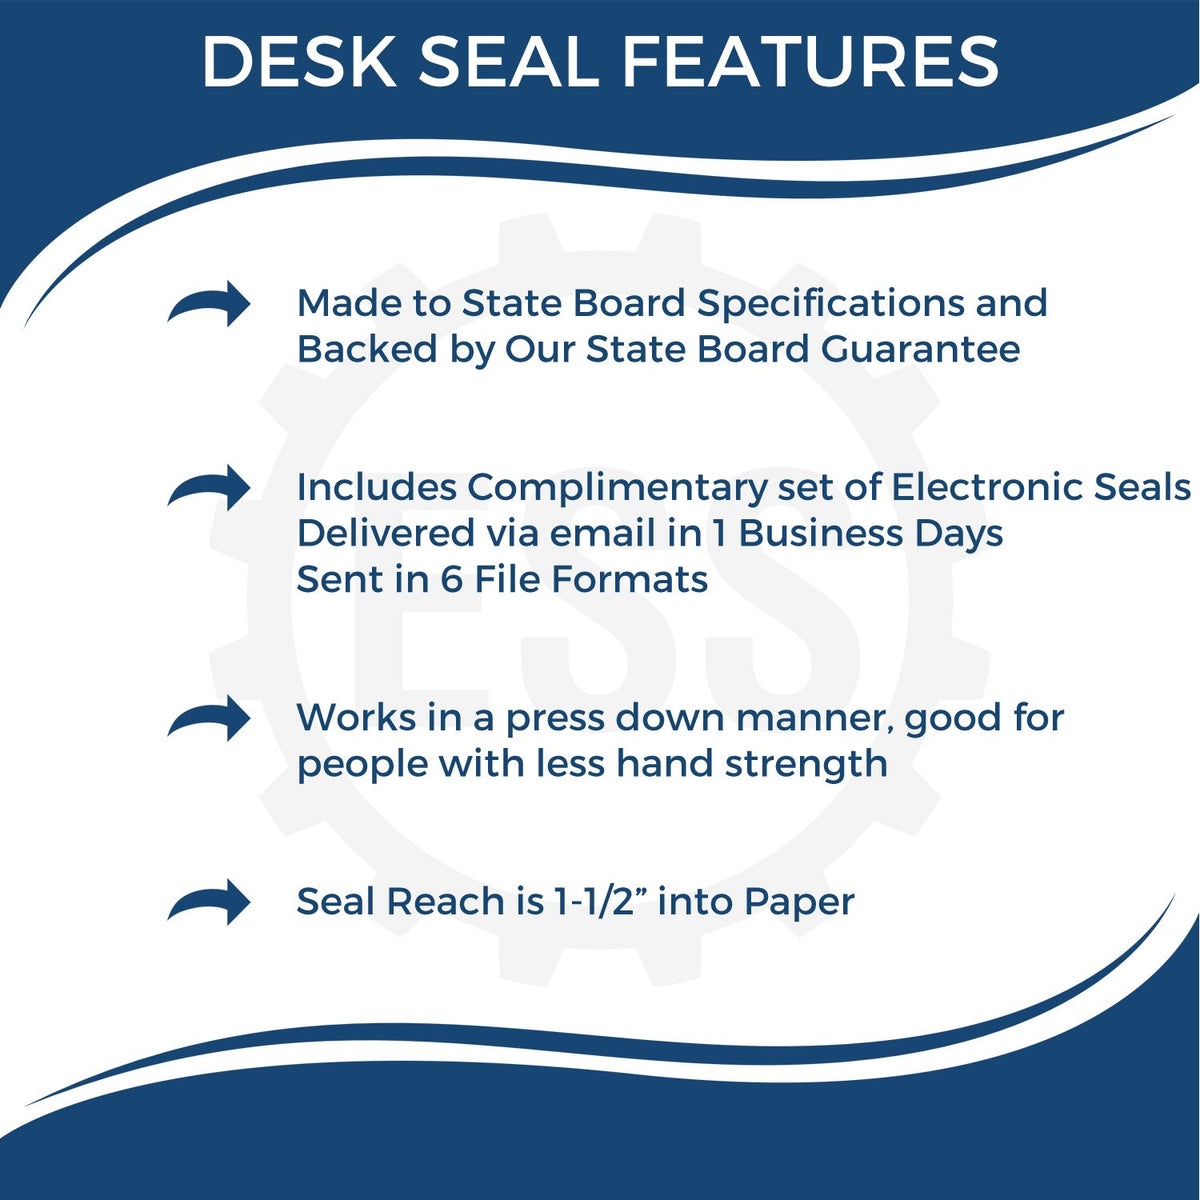 A picture of an infographic highlighting the selling points for the Delaware Geologist Desk Seal